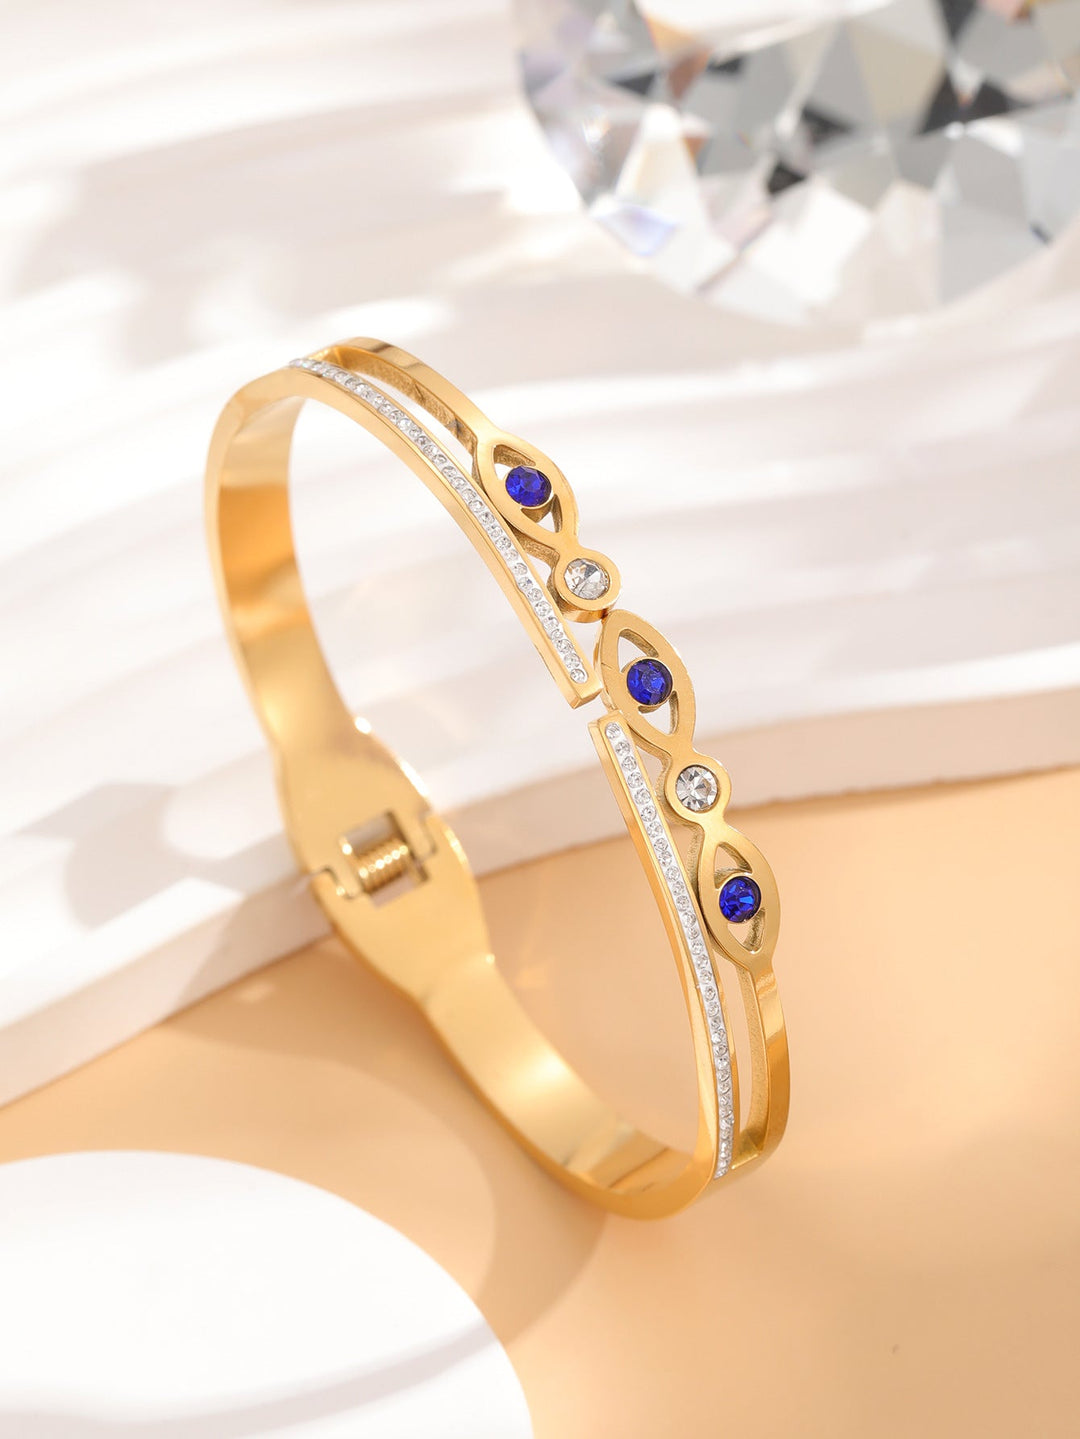 Evil Eye Stainless Steel Statement Bracelet For Women Trendy Fashion Female Ethnic Style Inlaid Shell Jewelry